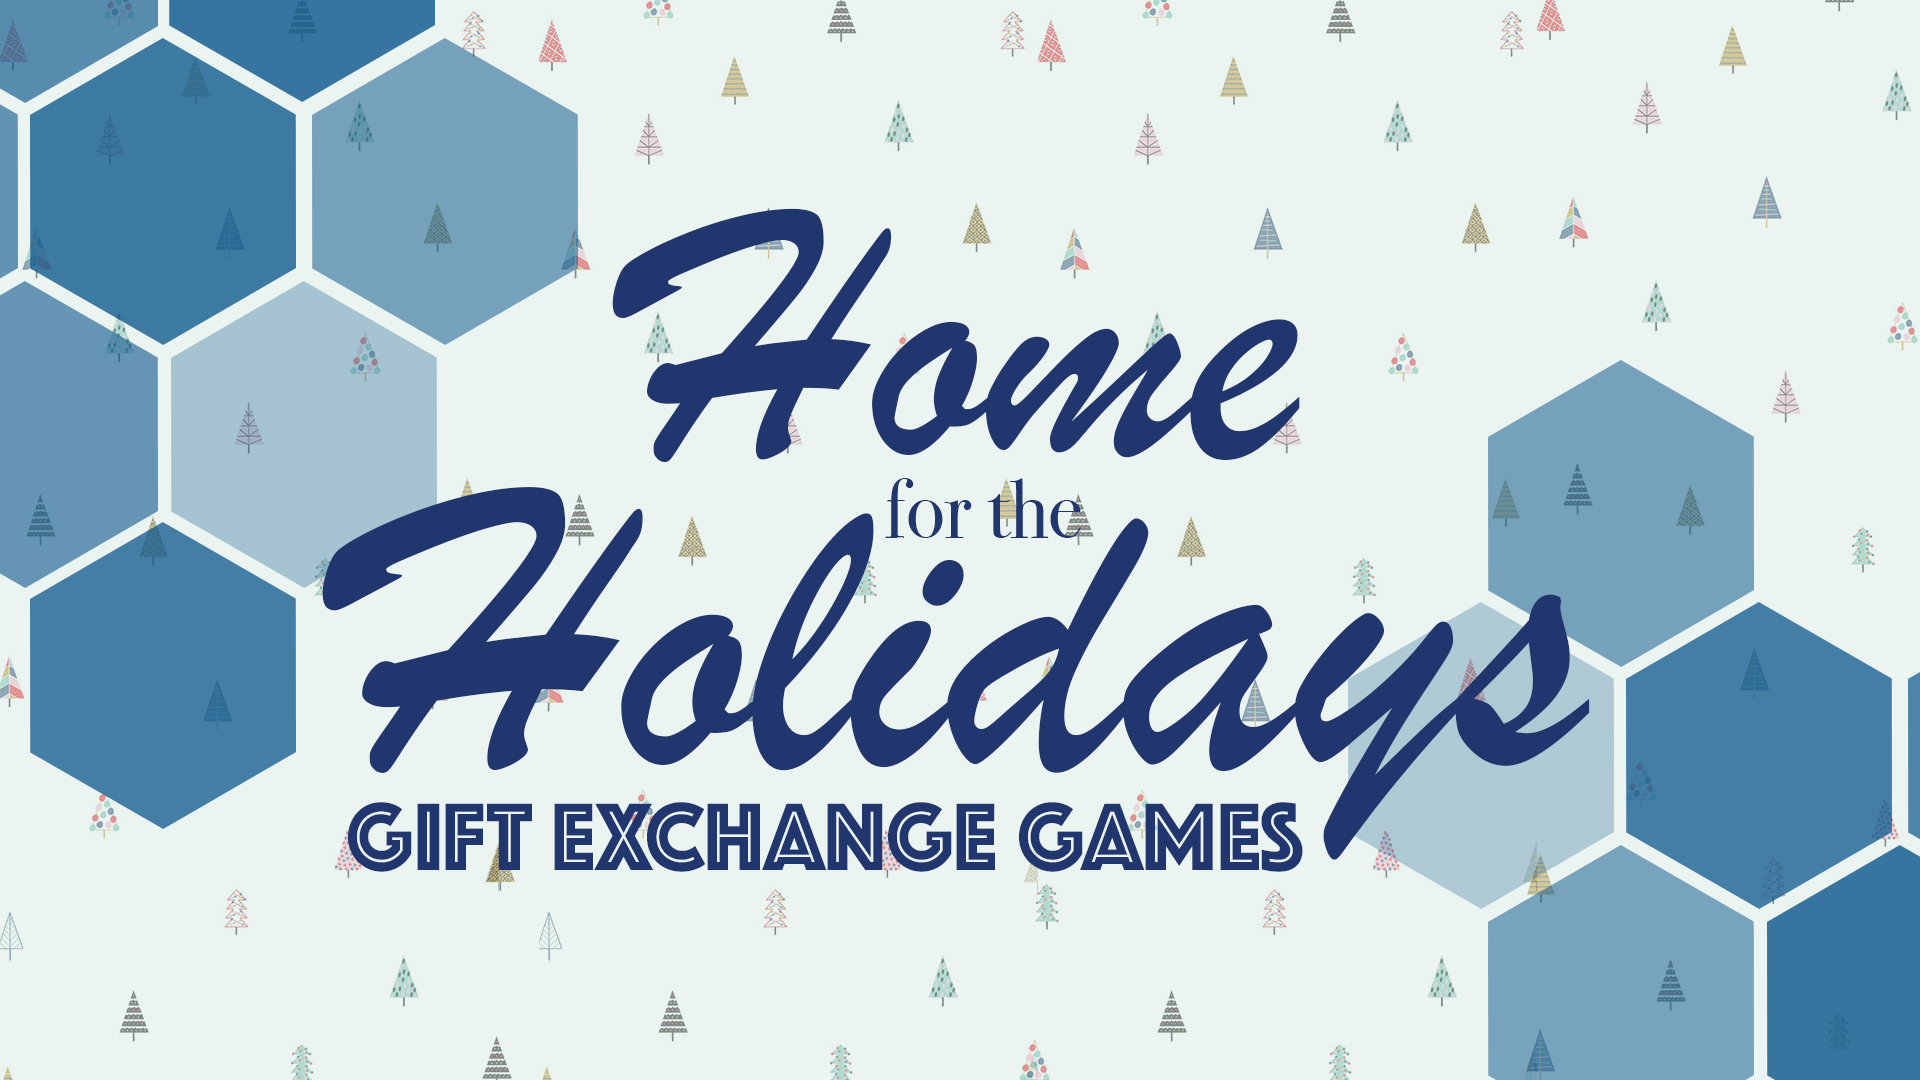 Christmas Gift Exchange Games to play this Holiday - The Tabletop